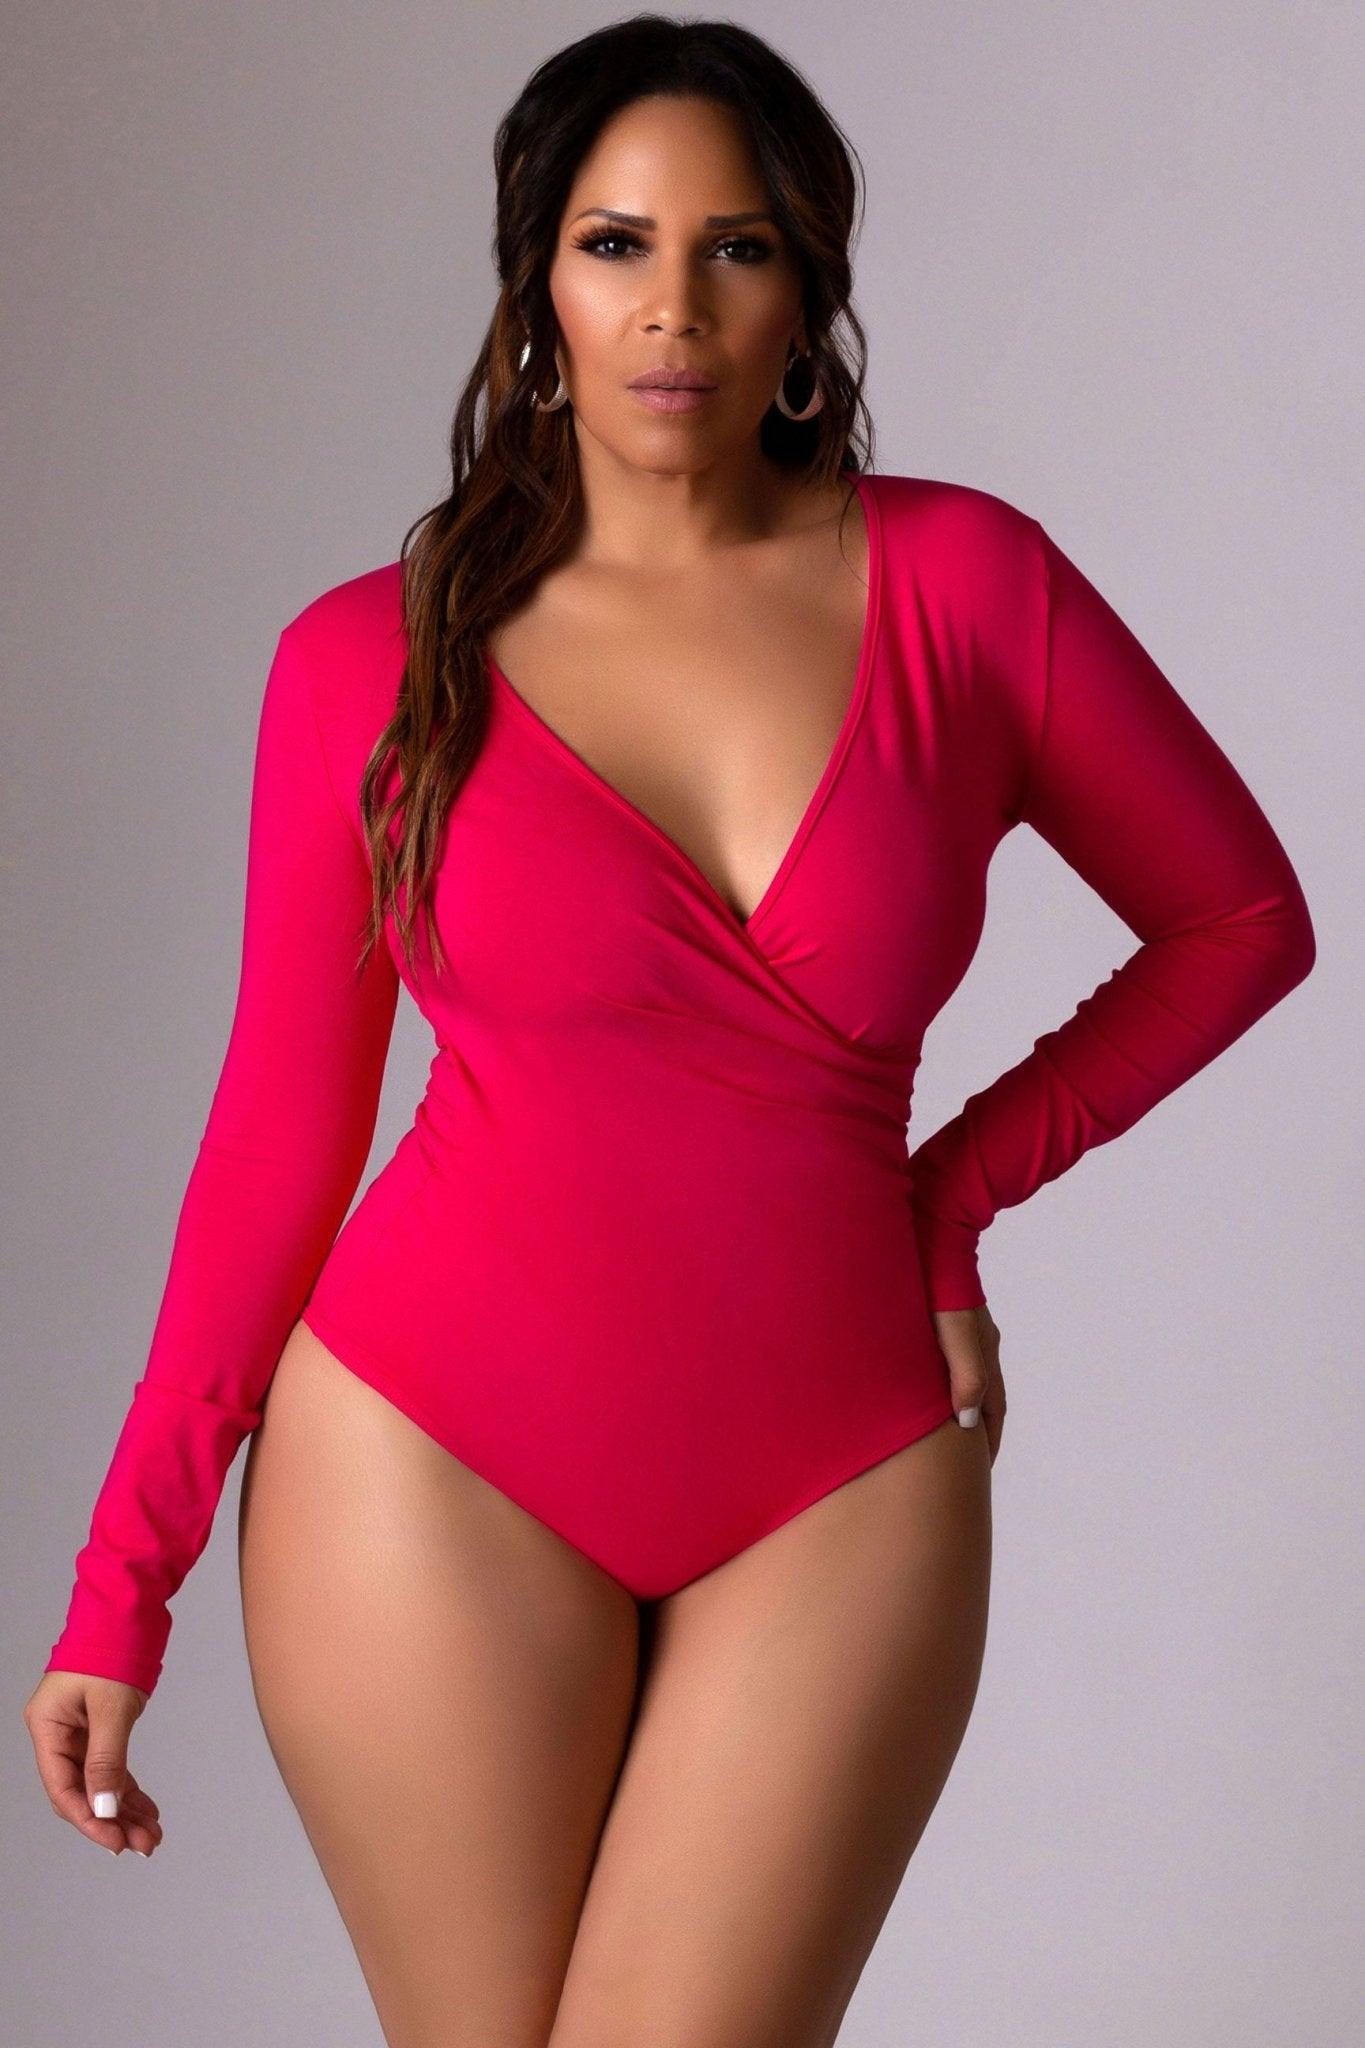 Carolina Plunging V-Neck Crossed Front Long Sleeves Bodysuit Top - MY SEXY STYLES